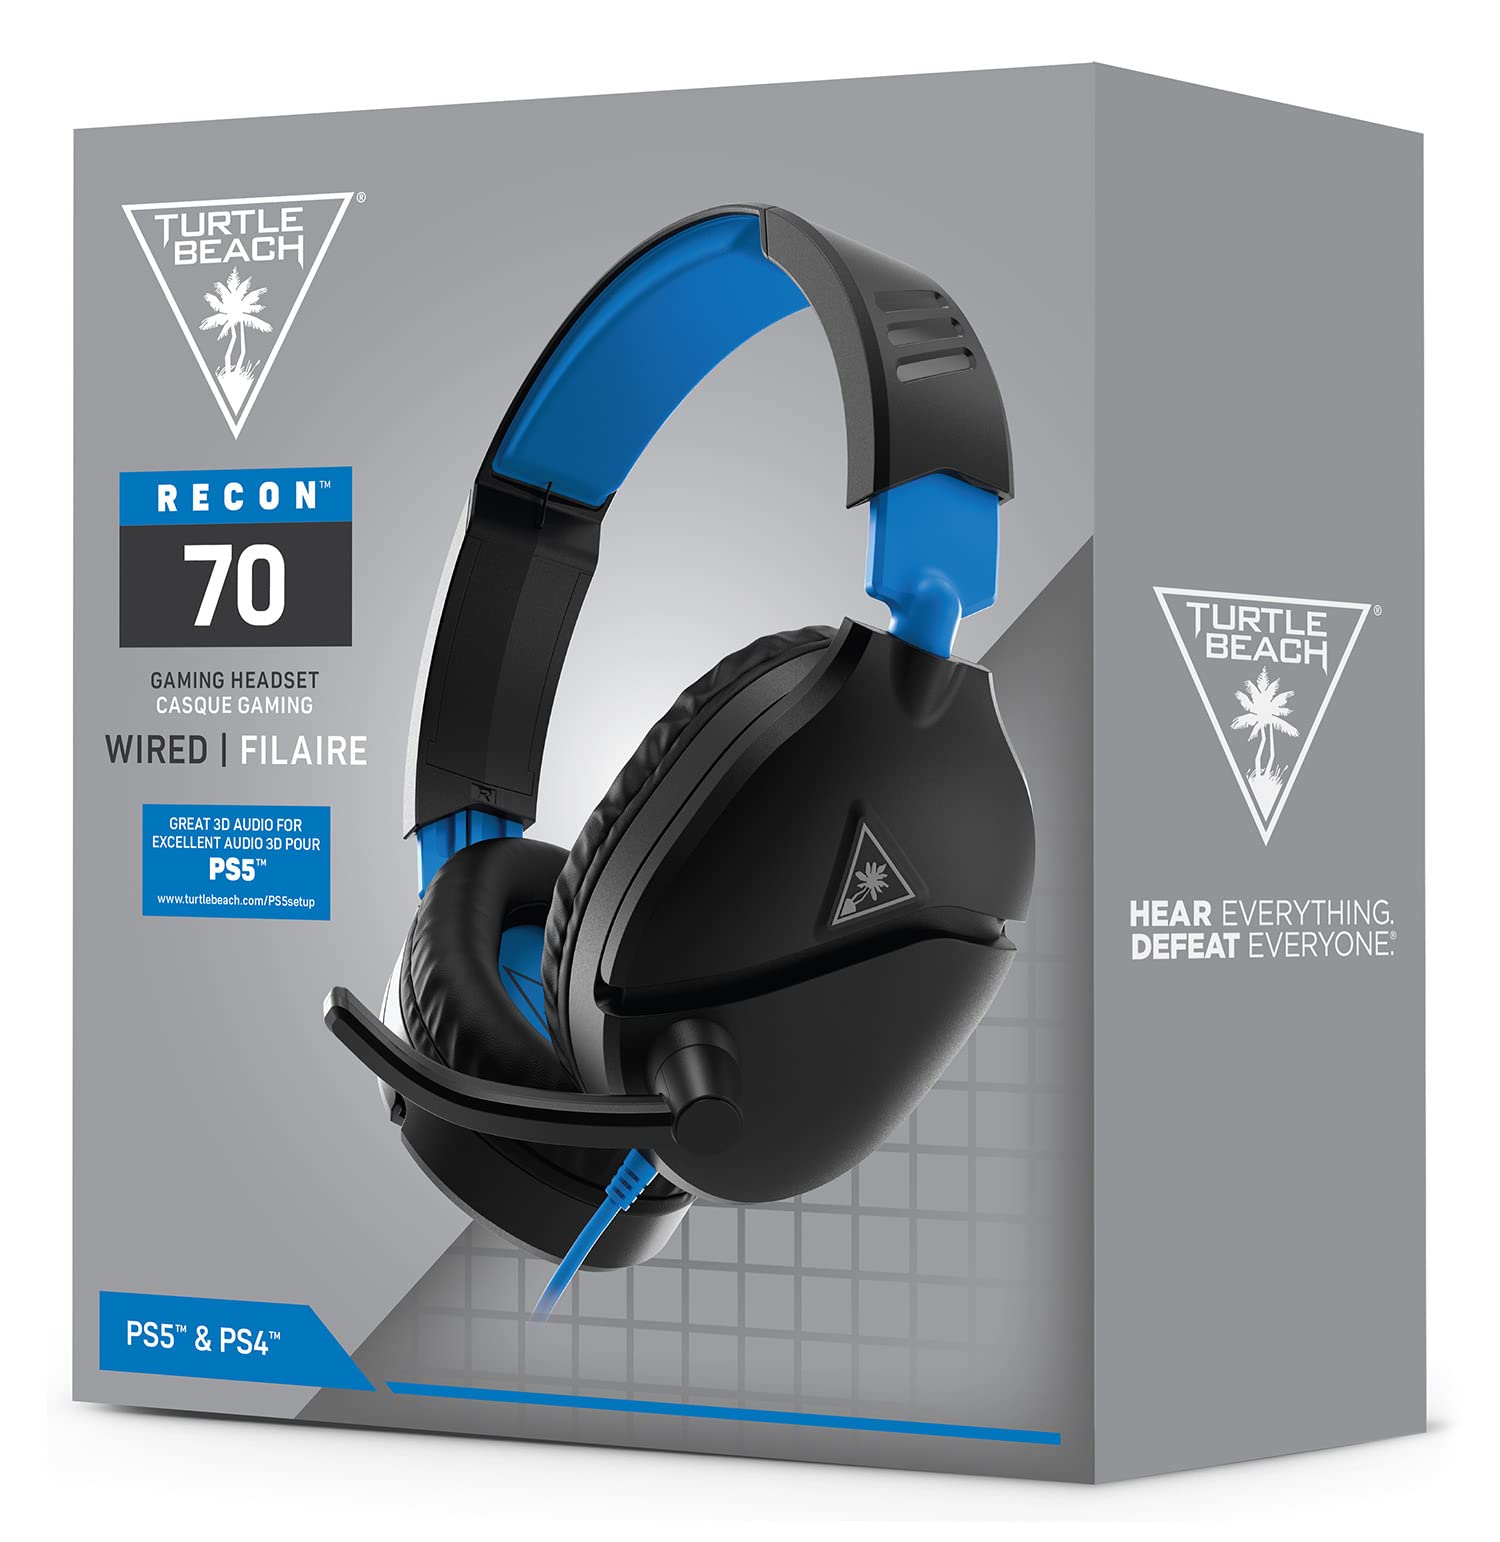 Turtle Beach Recon 70 PlayStation Gaming Headset for PS5, PS4, Xbox Series X| S, Xbox One, Nintendo Switch, Mobile, & PC with 3.5mm - Flip-to-Mute Mic, 40mm Speakers, 3D Audio – Black